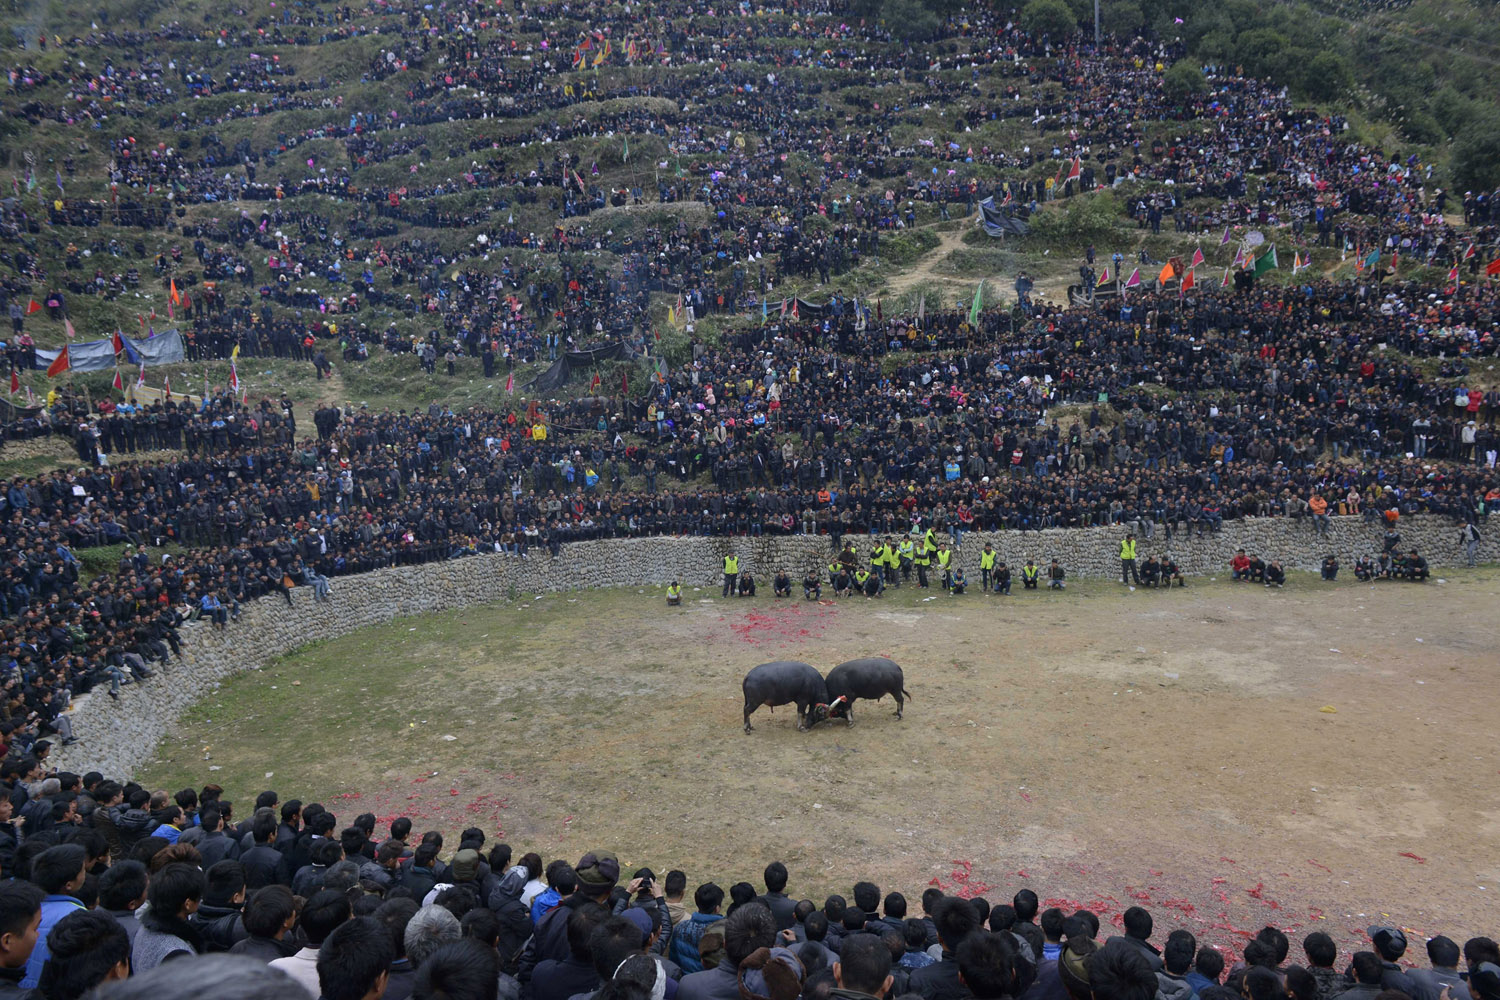 People from neighbouring villages watch a bullfight in Congjiang county